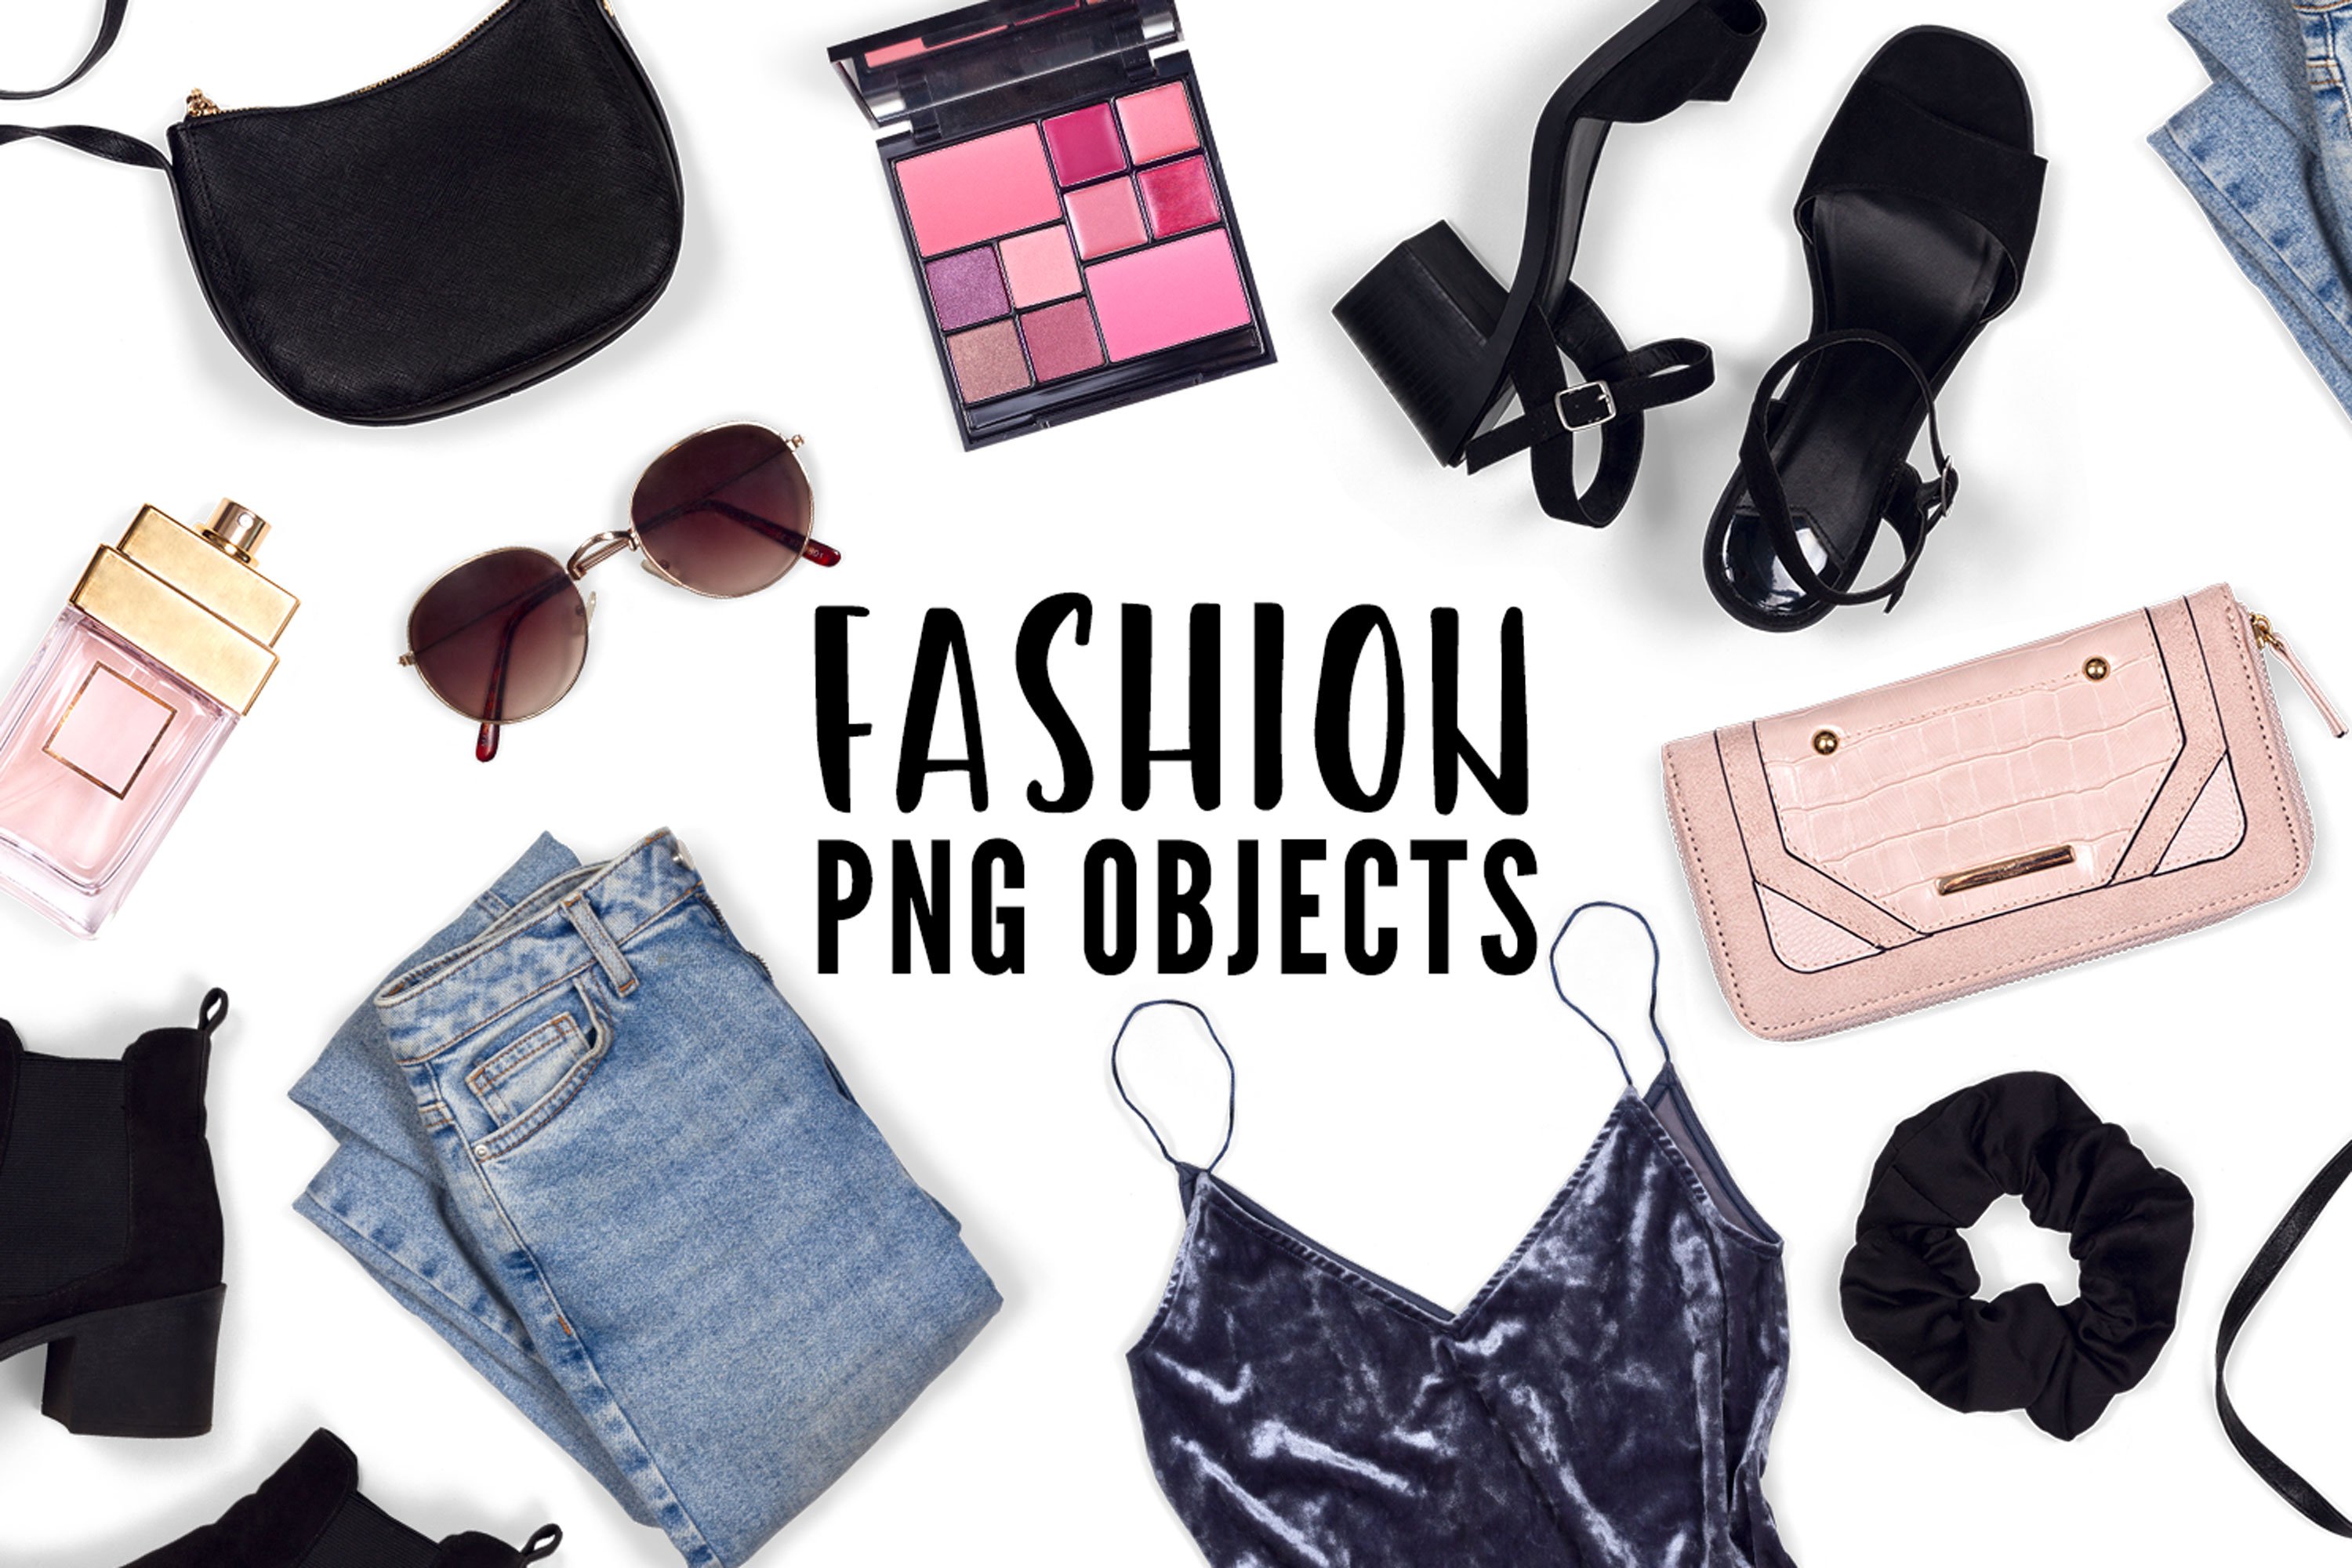 Fashion PNG Objects for Mockups cover image.